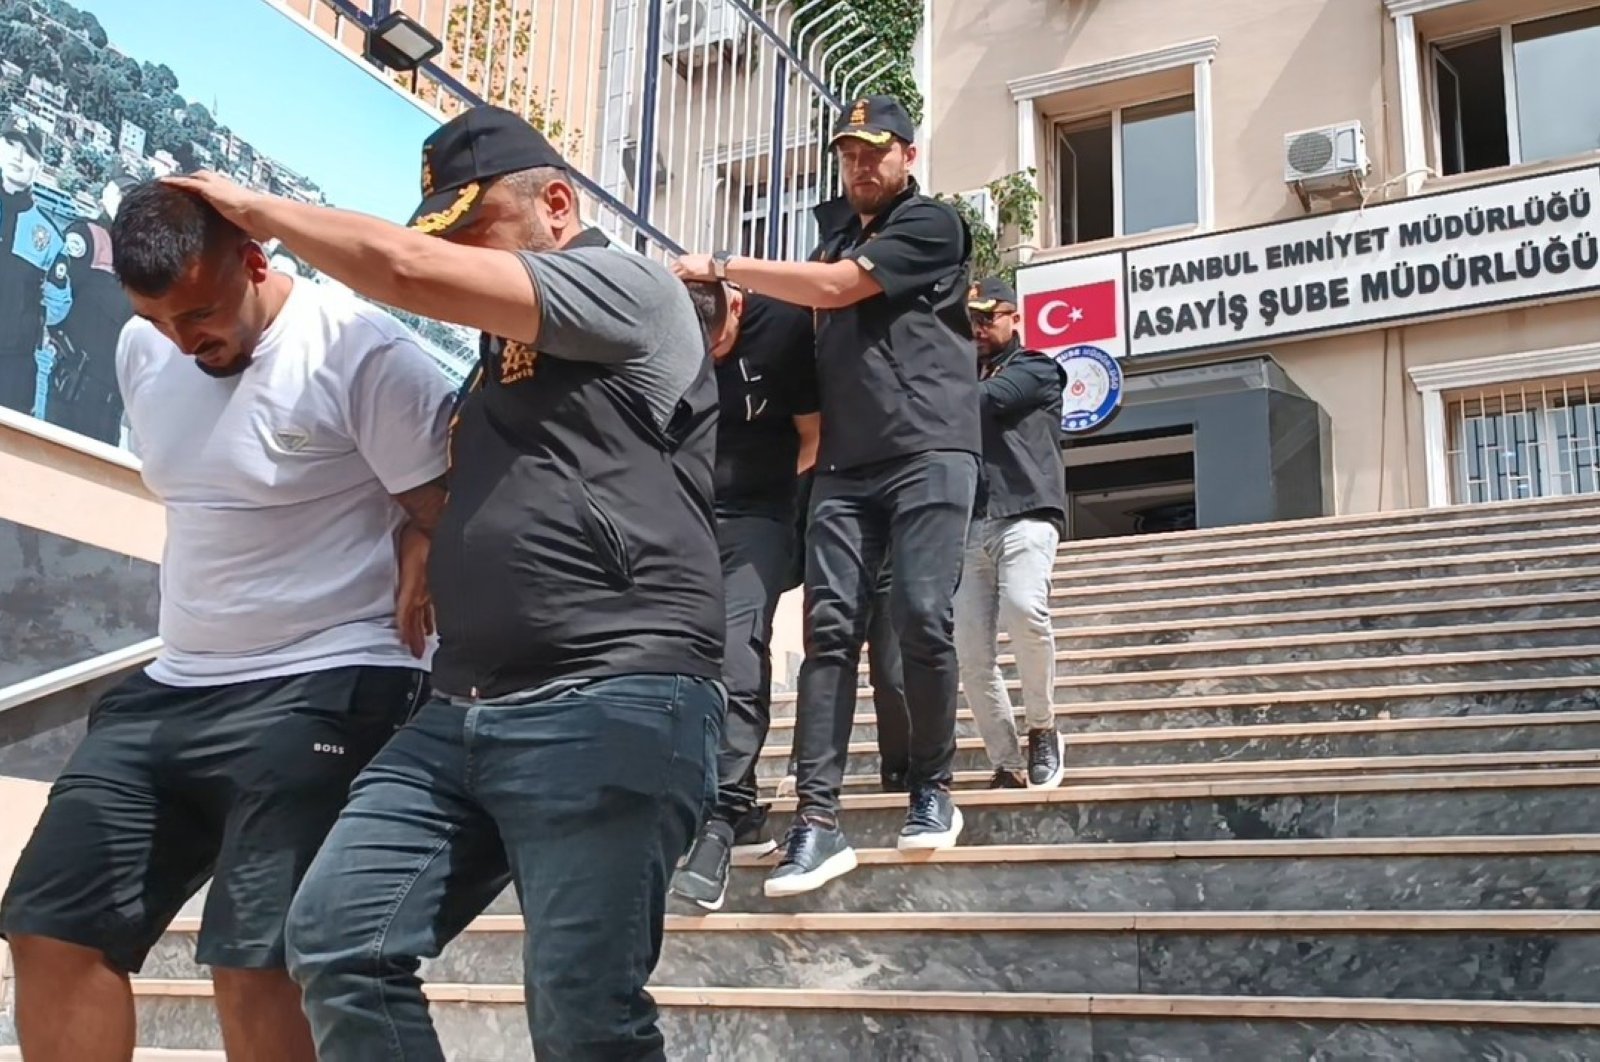 Swedish nationals detained in Istanbul's armed confrontation